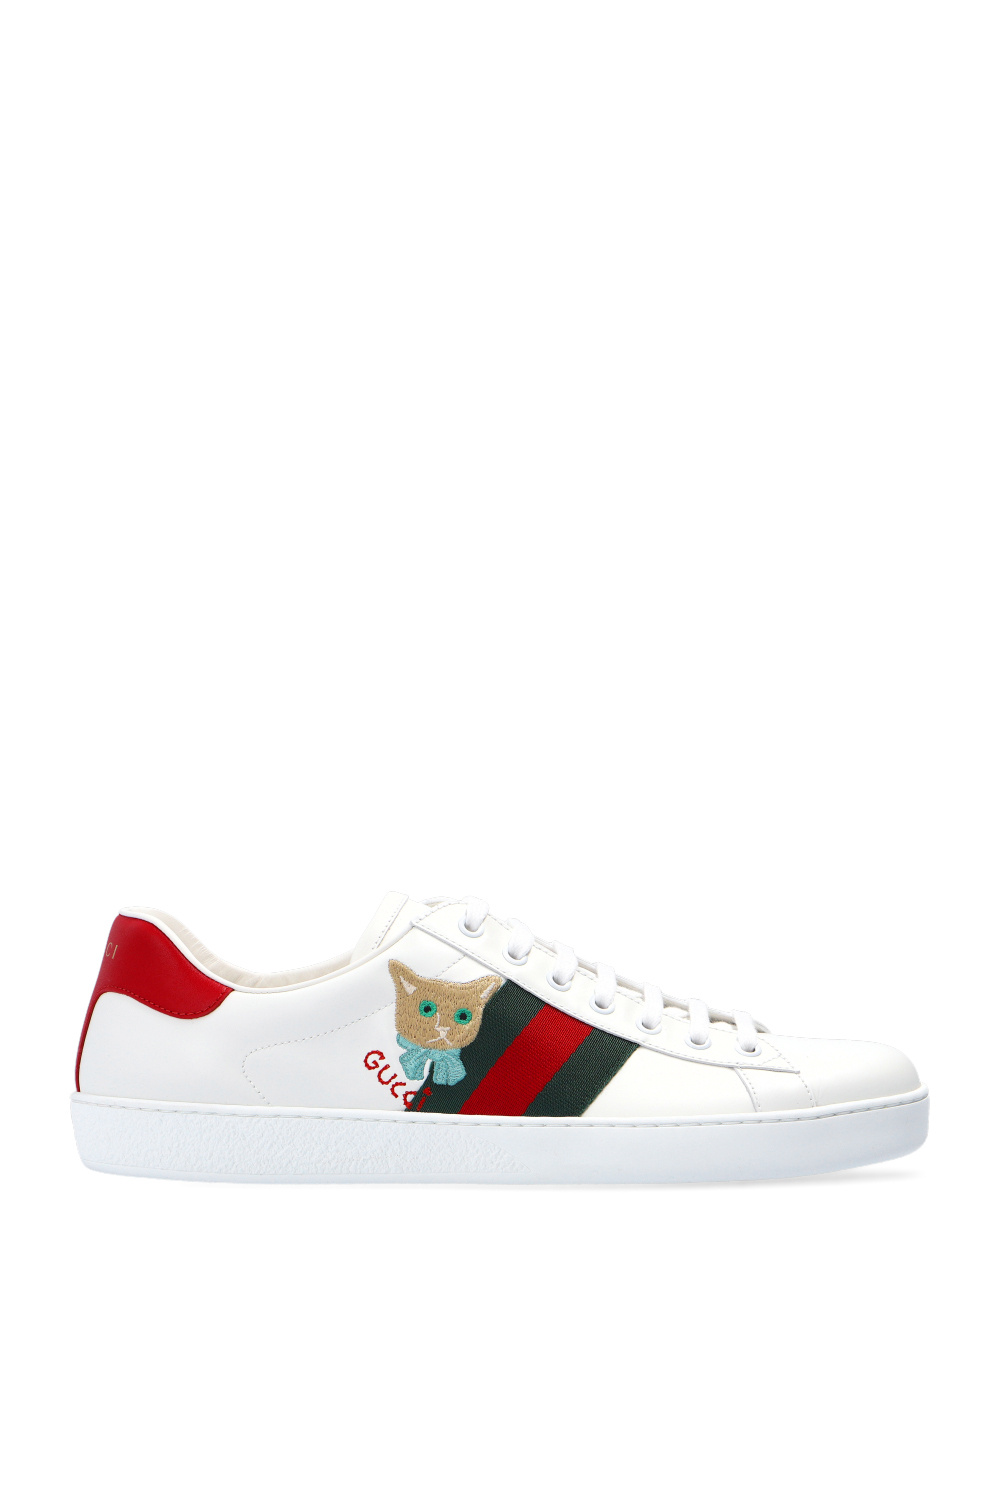 Download updated version the Gucci - S3telShops AG